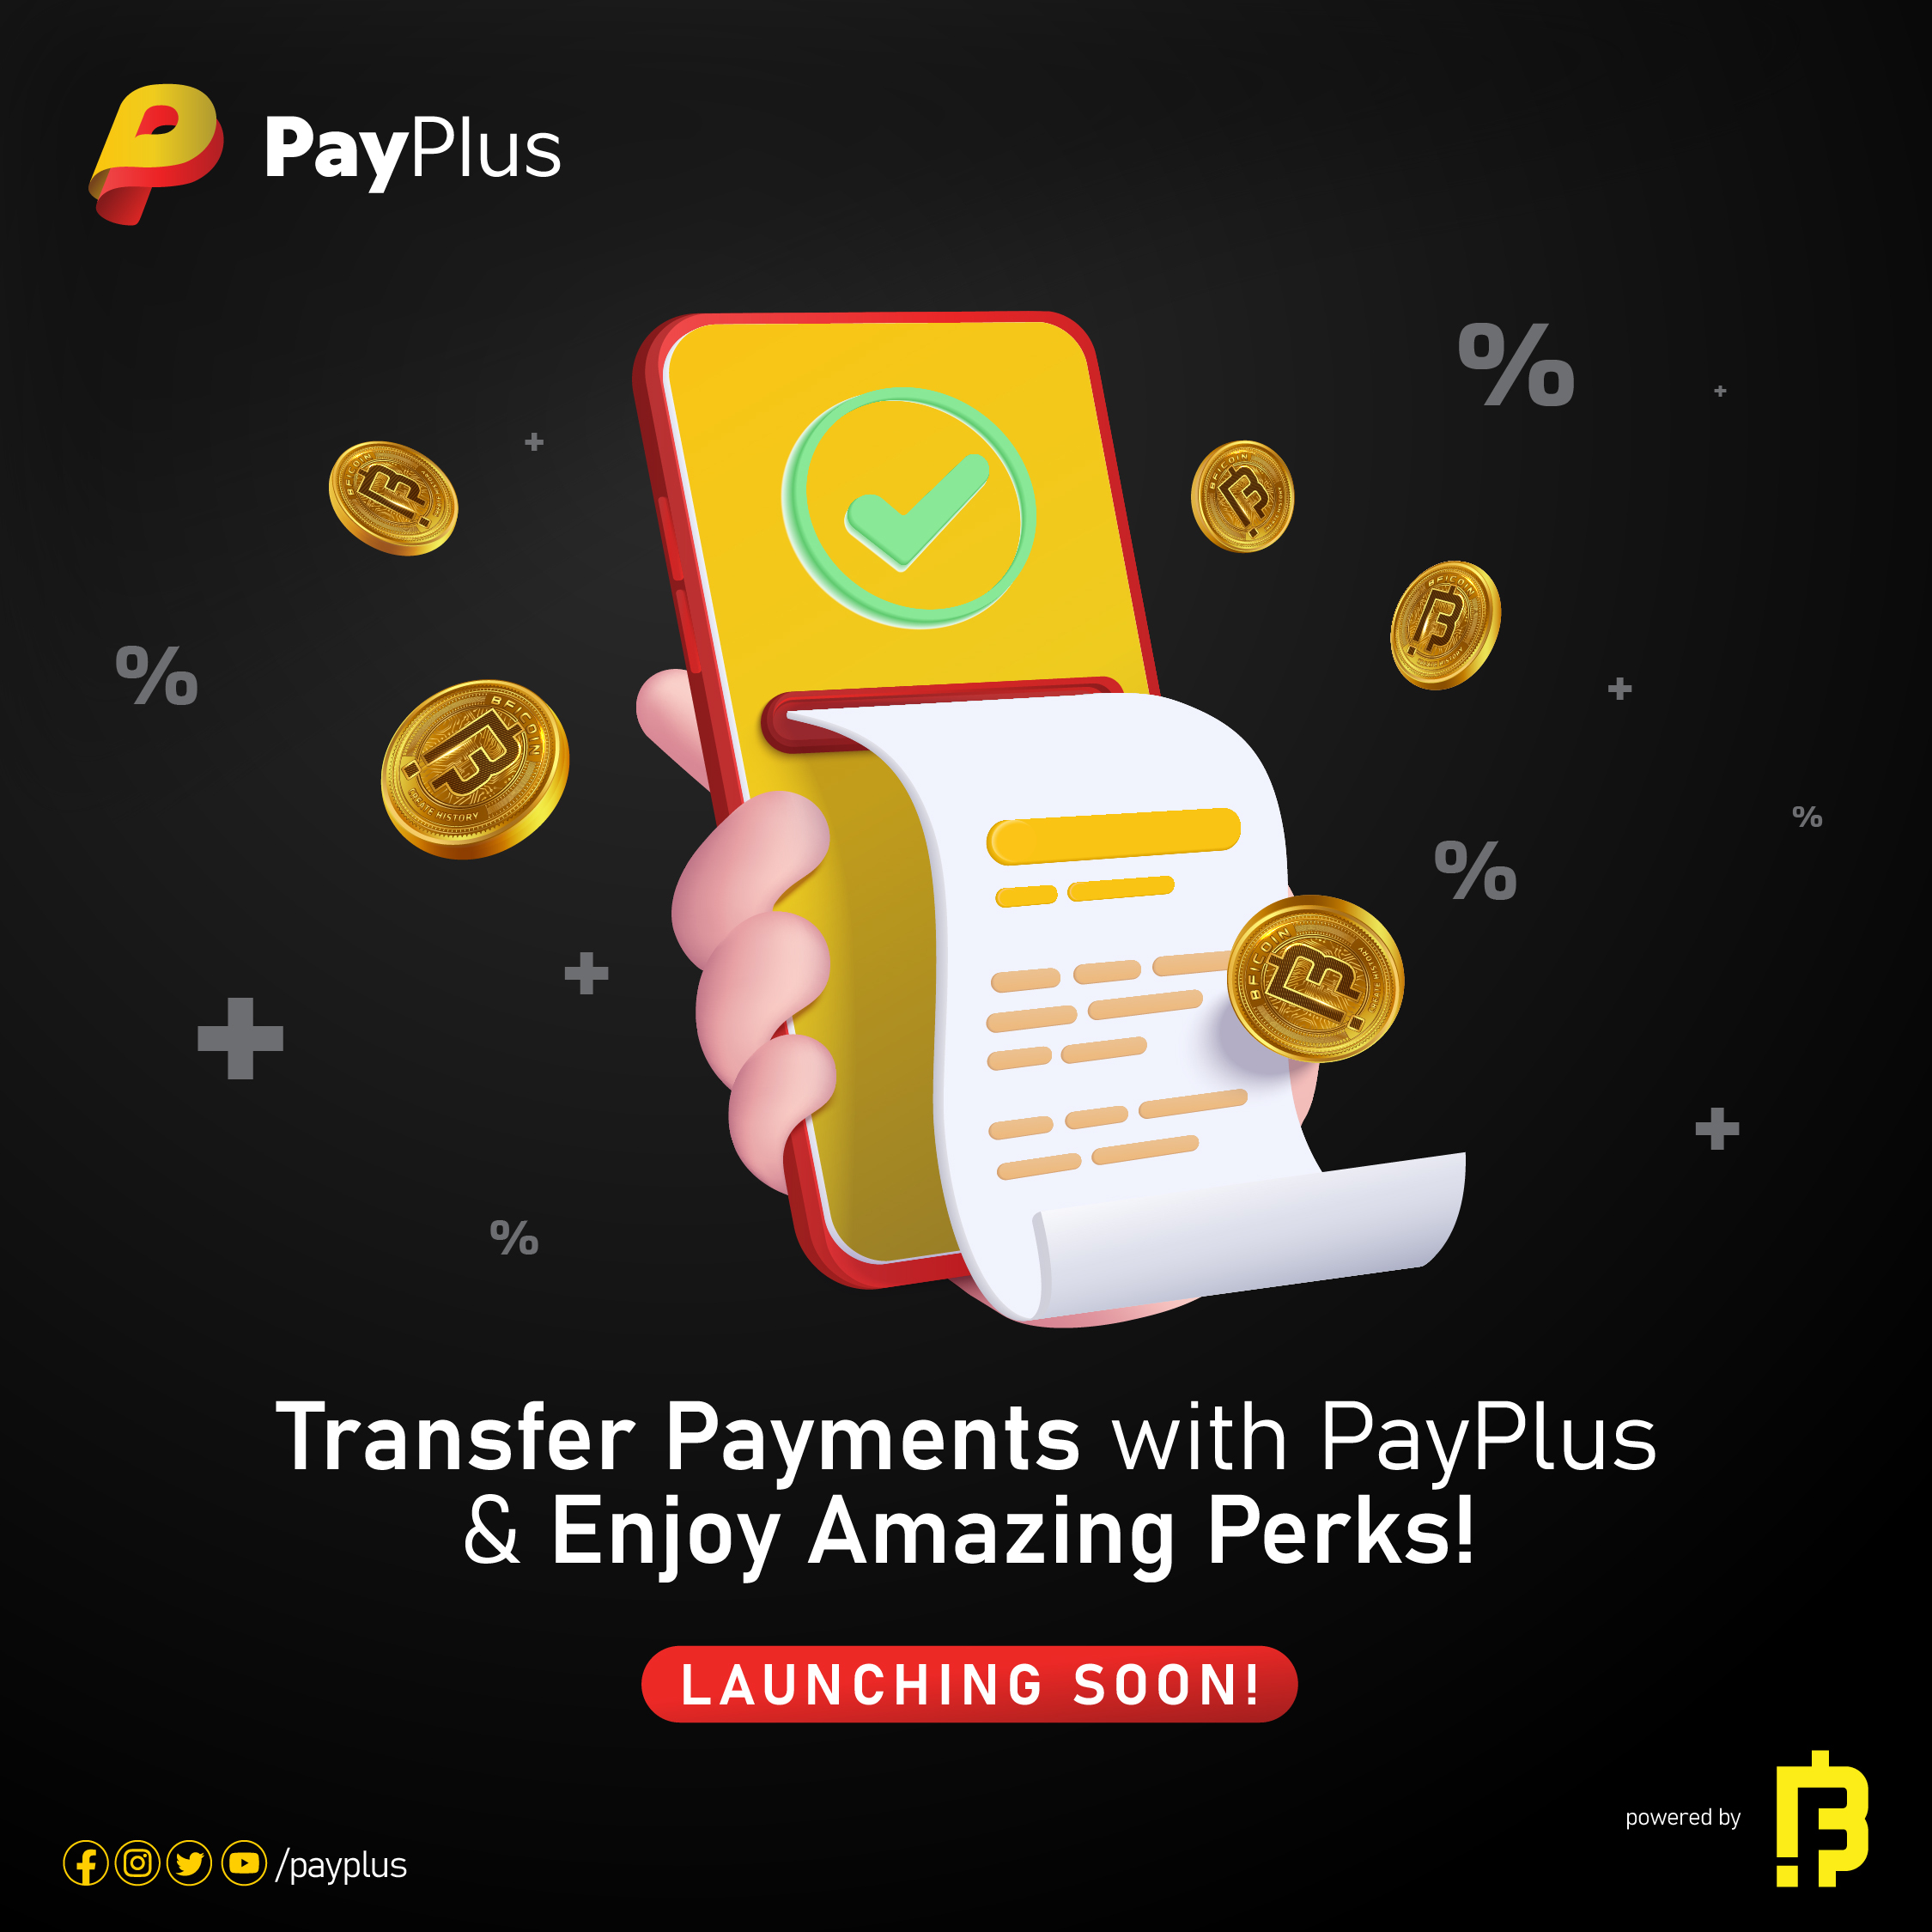 pay-plus-payplusofficial-twitter